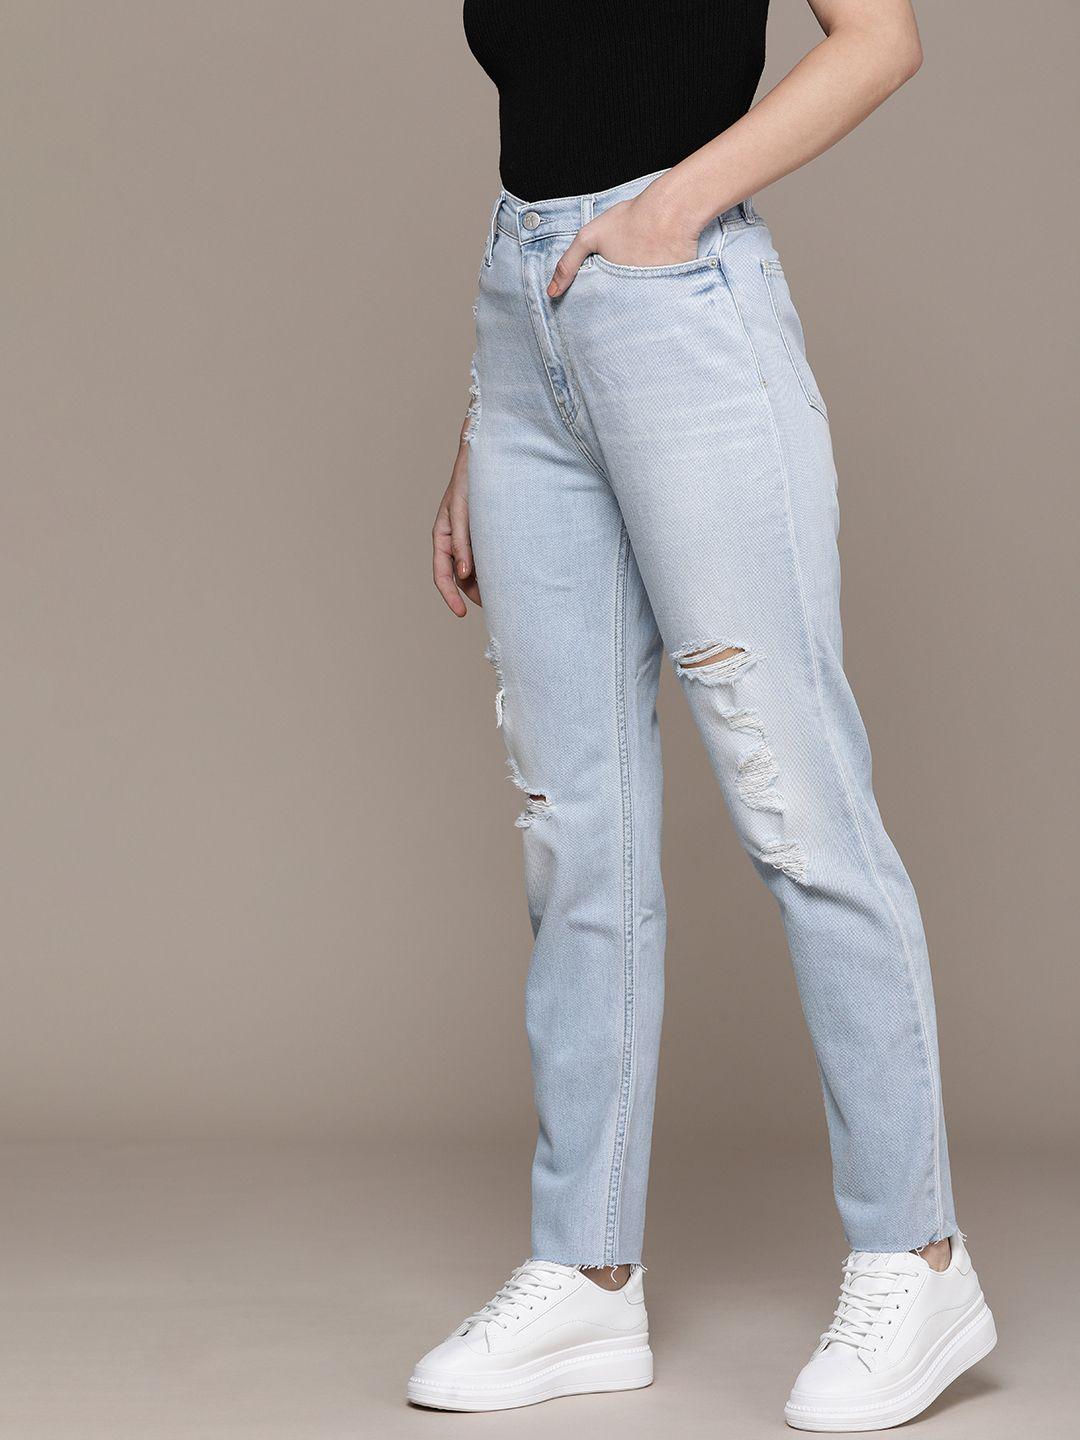 calvin klein jeans women blue tapered fit high-rise highly distressed light fade stretchable jeans